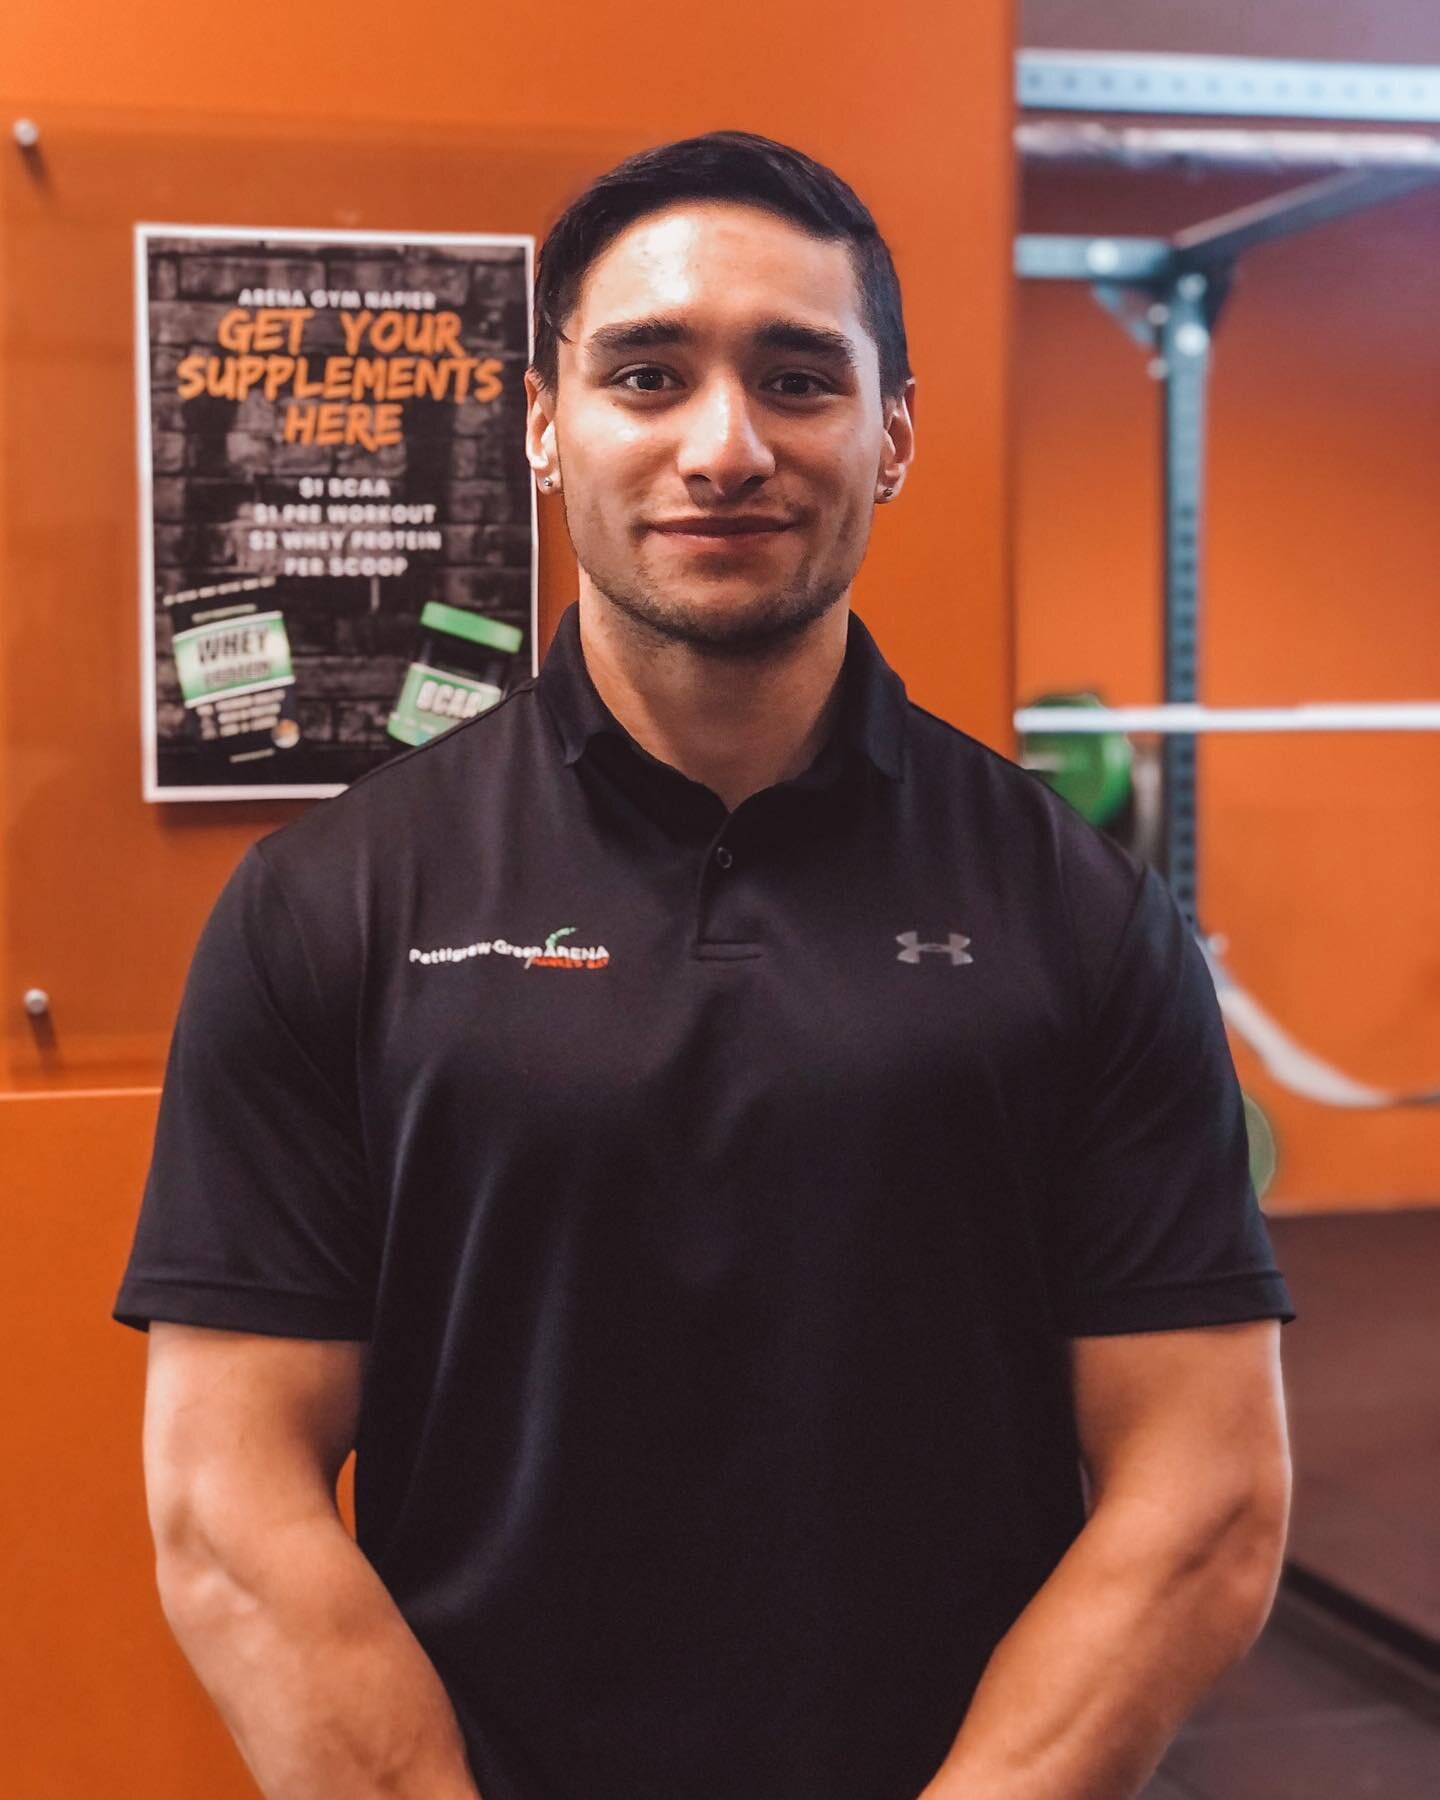 Okay it&rsquo;s about time to introduce you to Emile!

He joined us in March and is currently working towards an upcoming NABBA bodybuilding competition on the 10th of July at Taradale high school. If you want to know more about it feel free to ask h